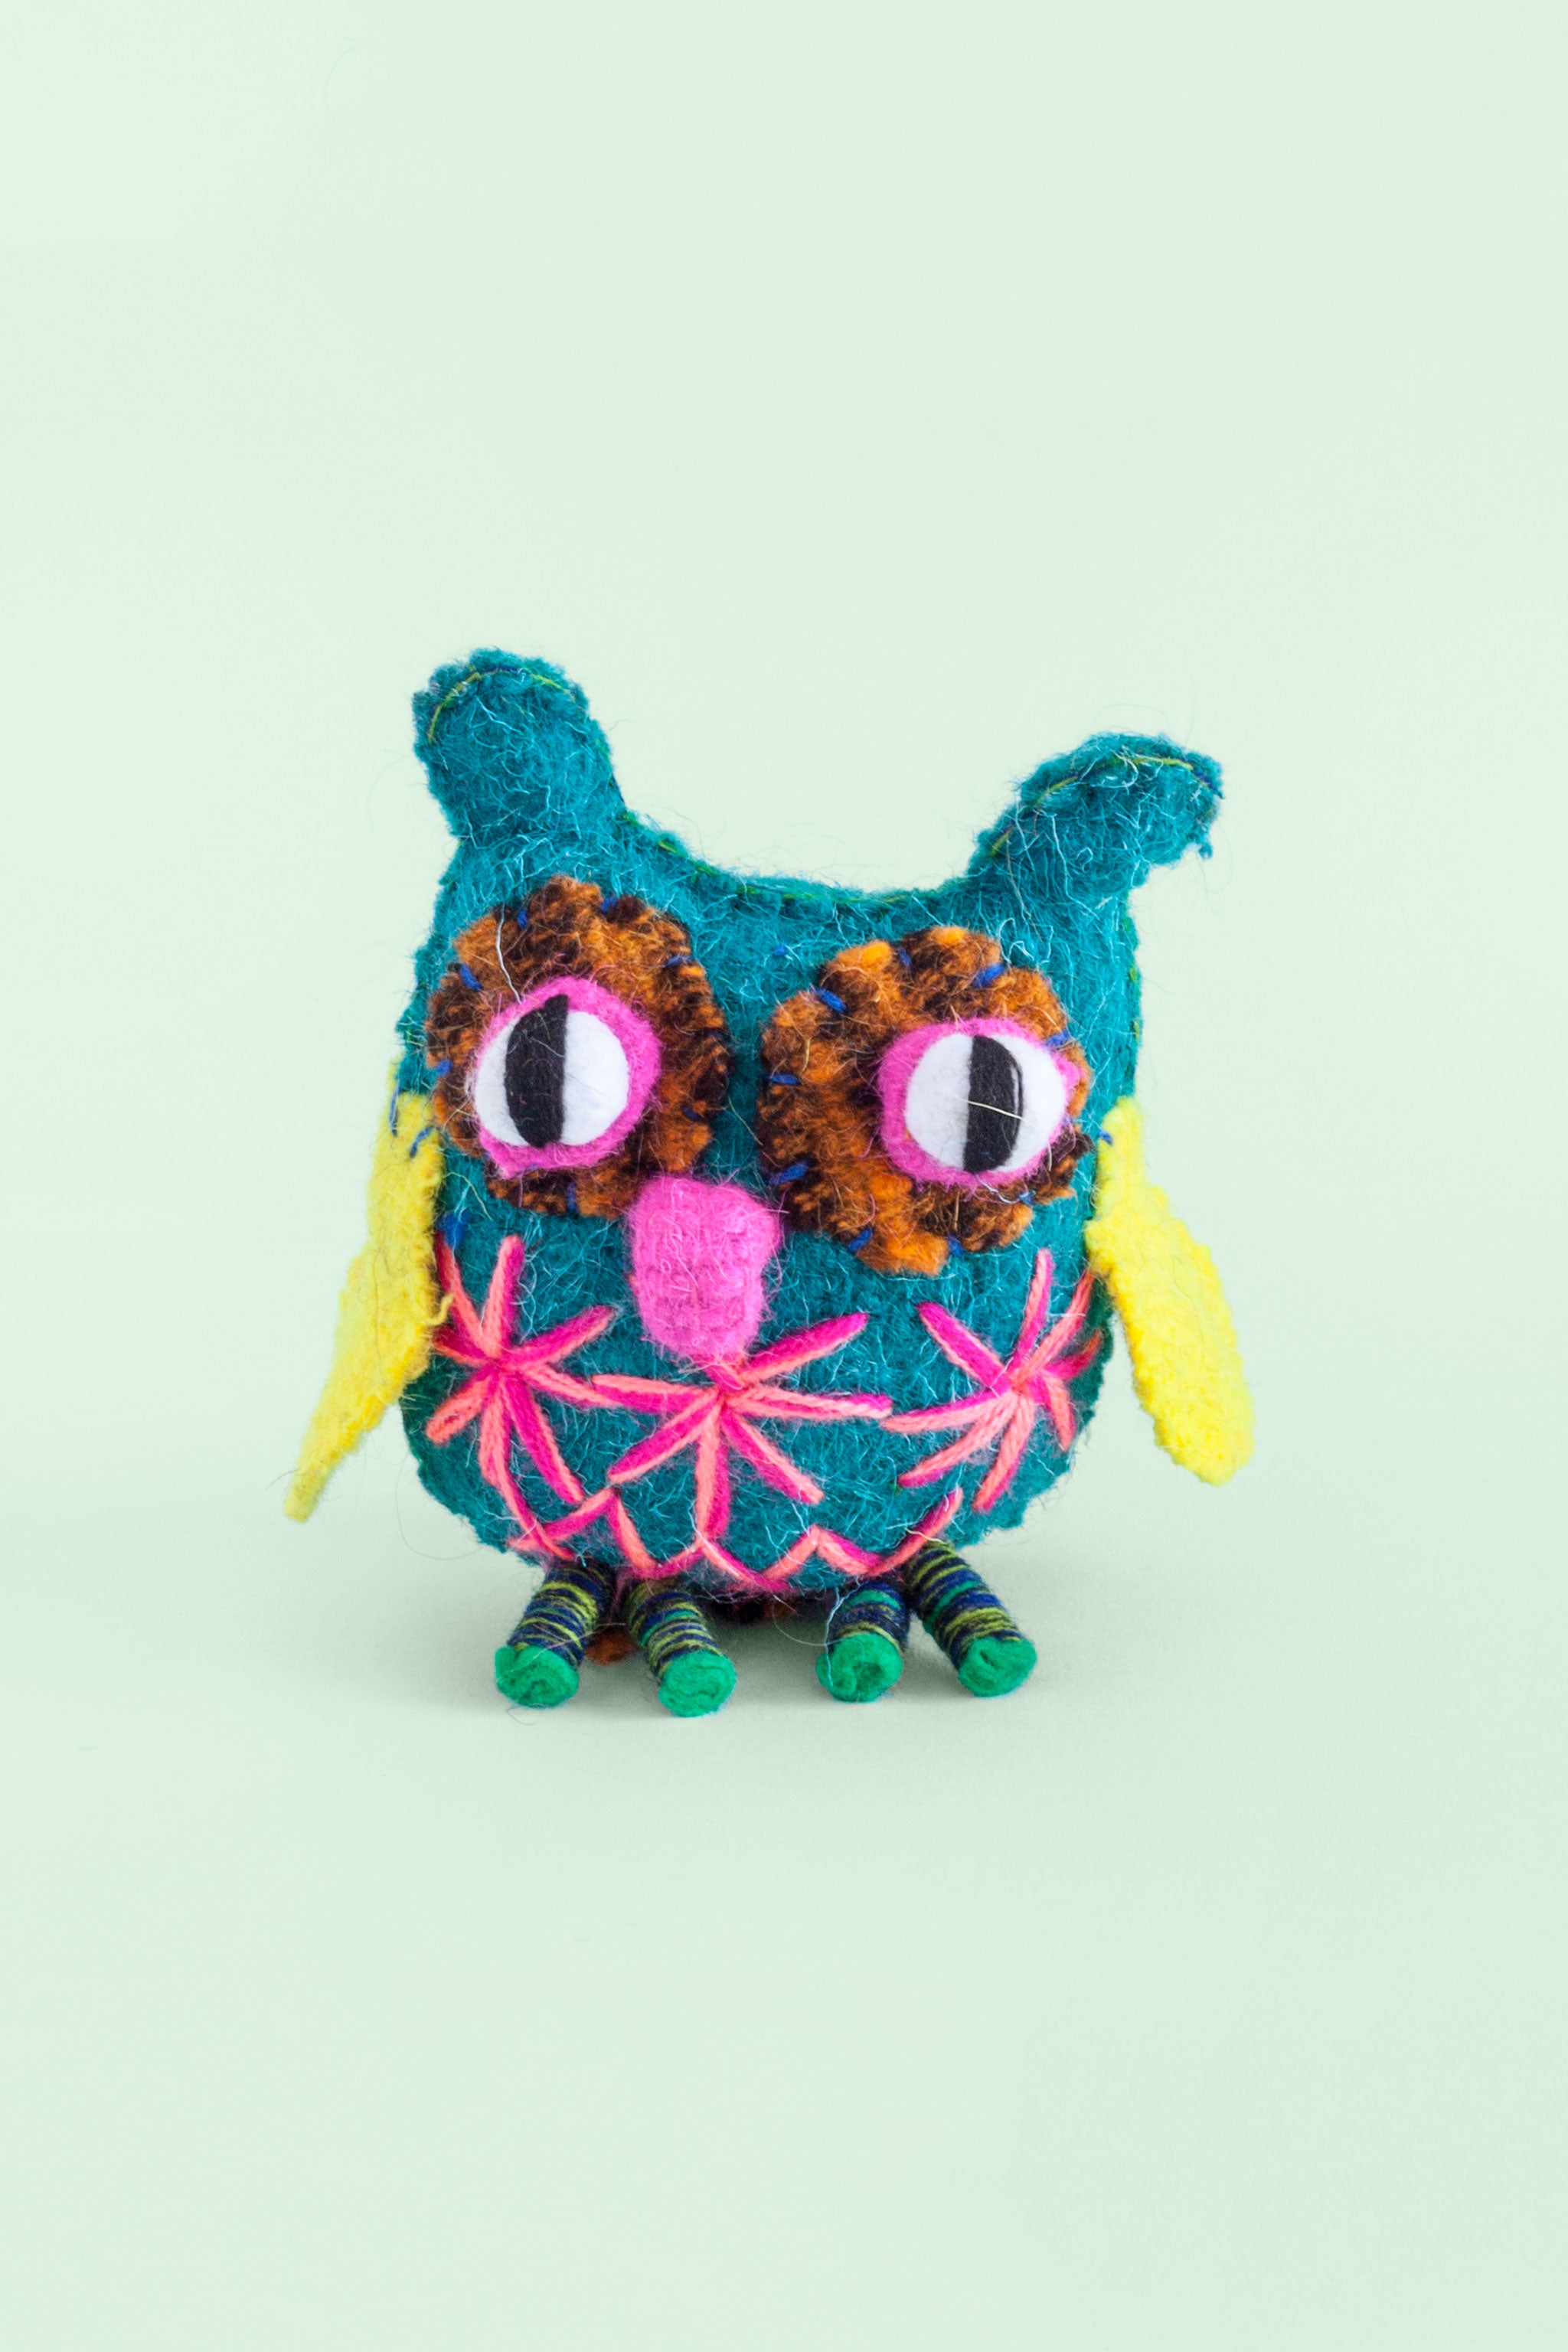 Colorful felt owl plush toy with hand-embroidered features and star designs.